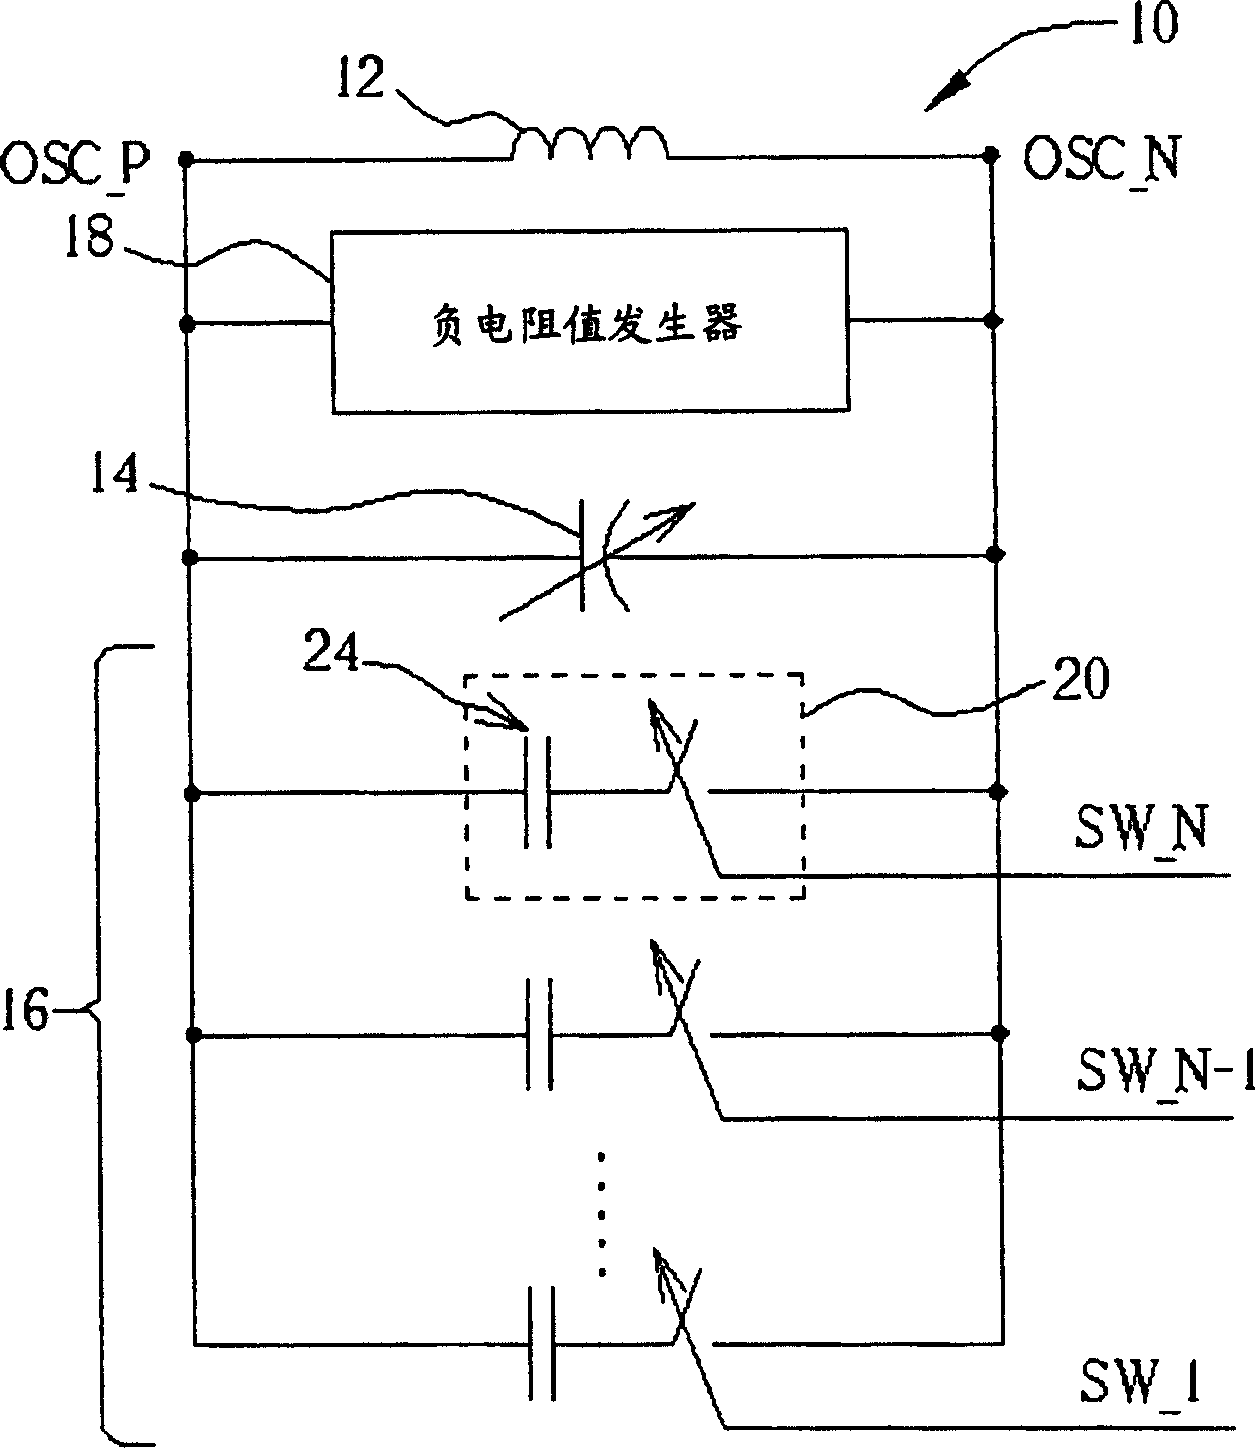 Switched capacitor circuit capable of eliminating clock feedthrough for vco